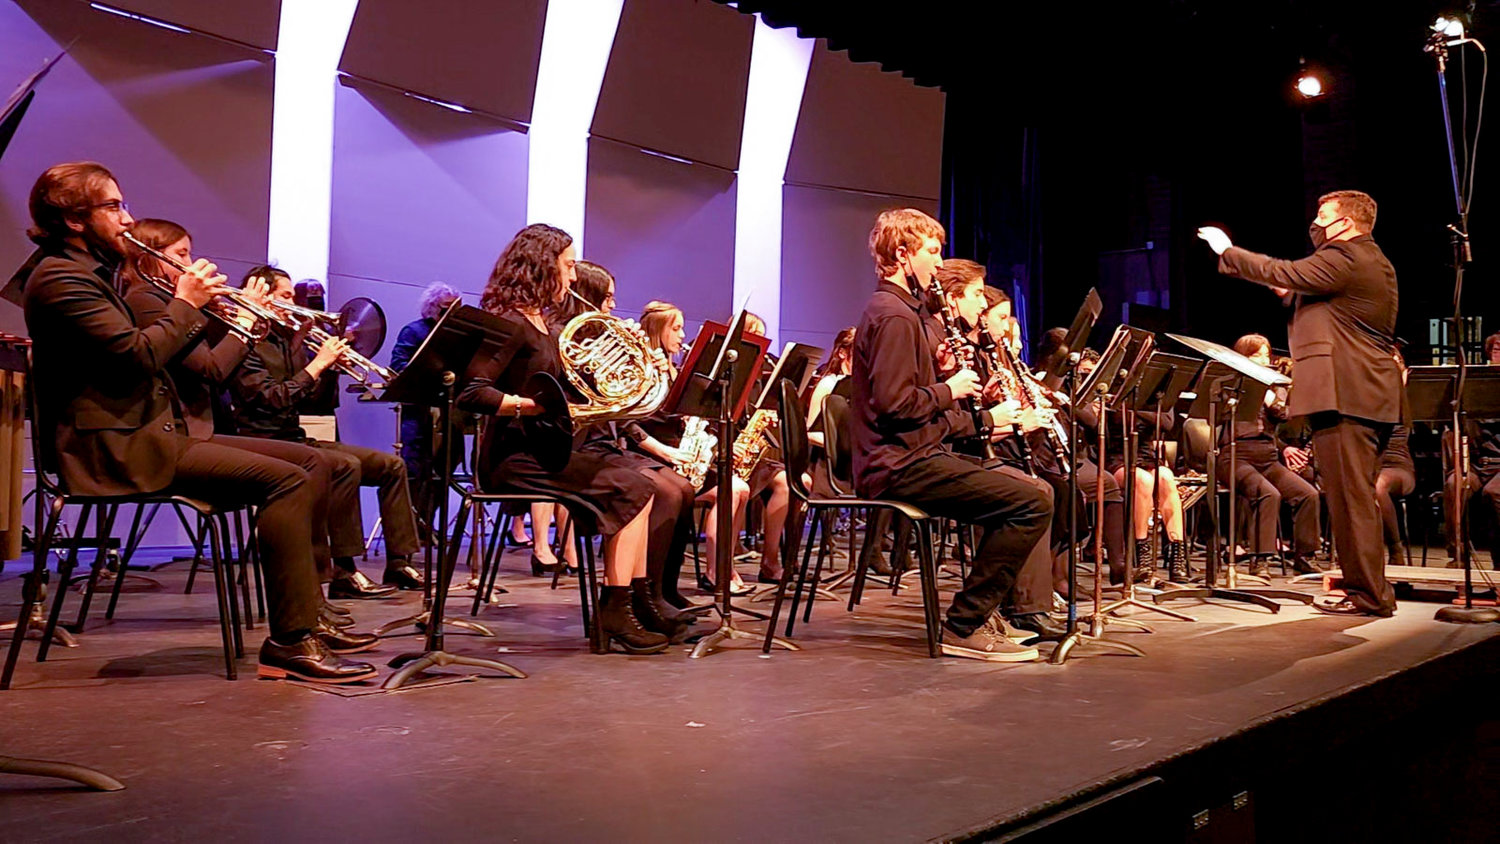 The Prairie High School wind ensemble performs in front of an in-person audience for the first time in two years during the 2022 Festival of Bands.